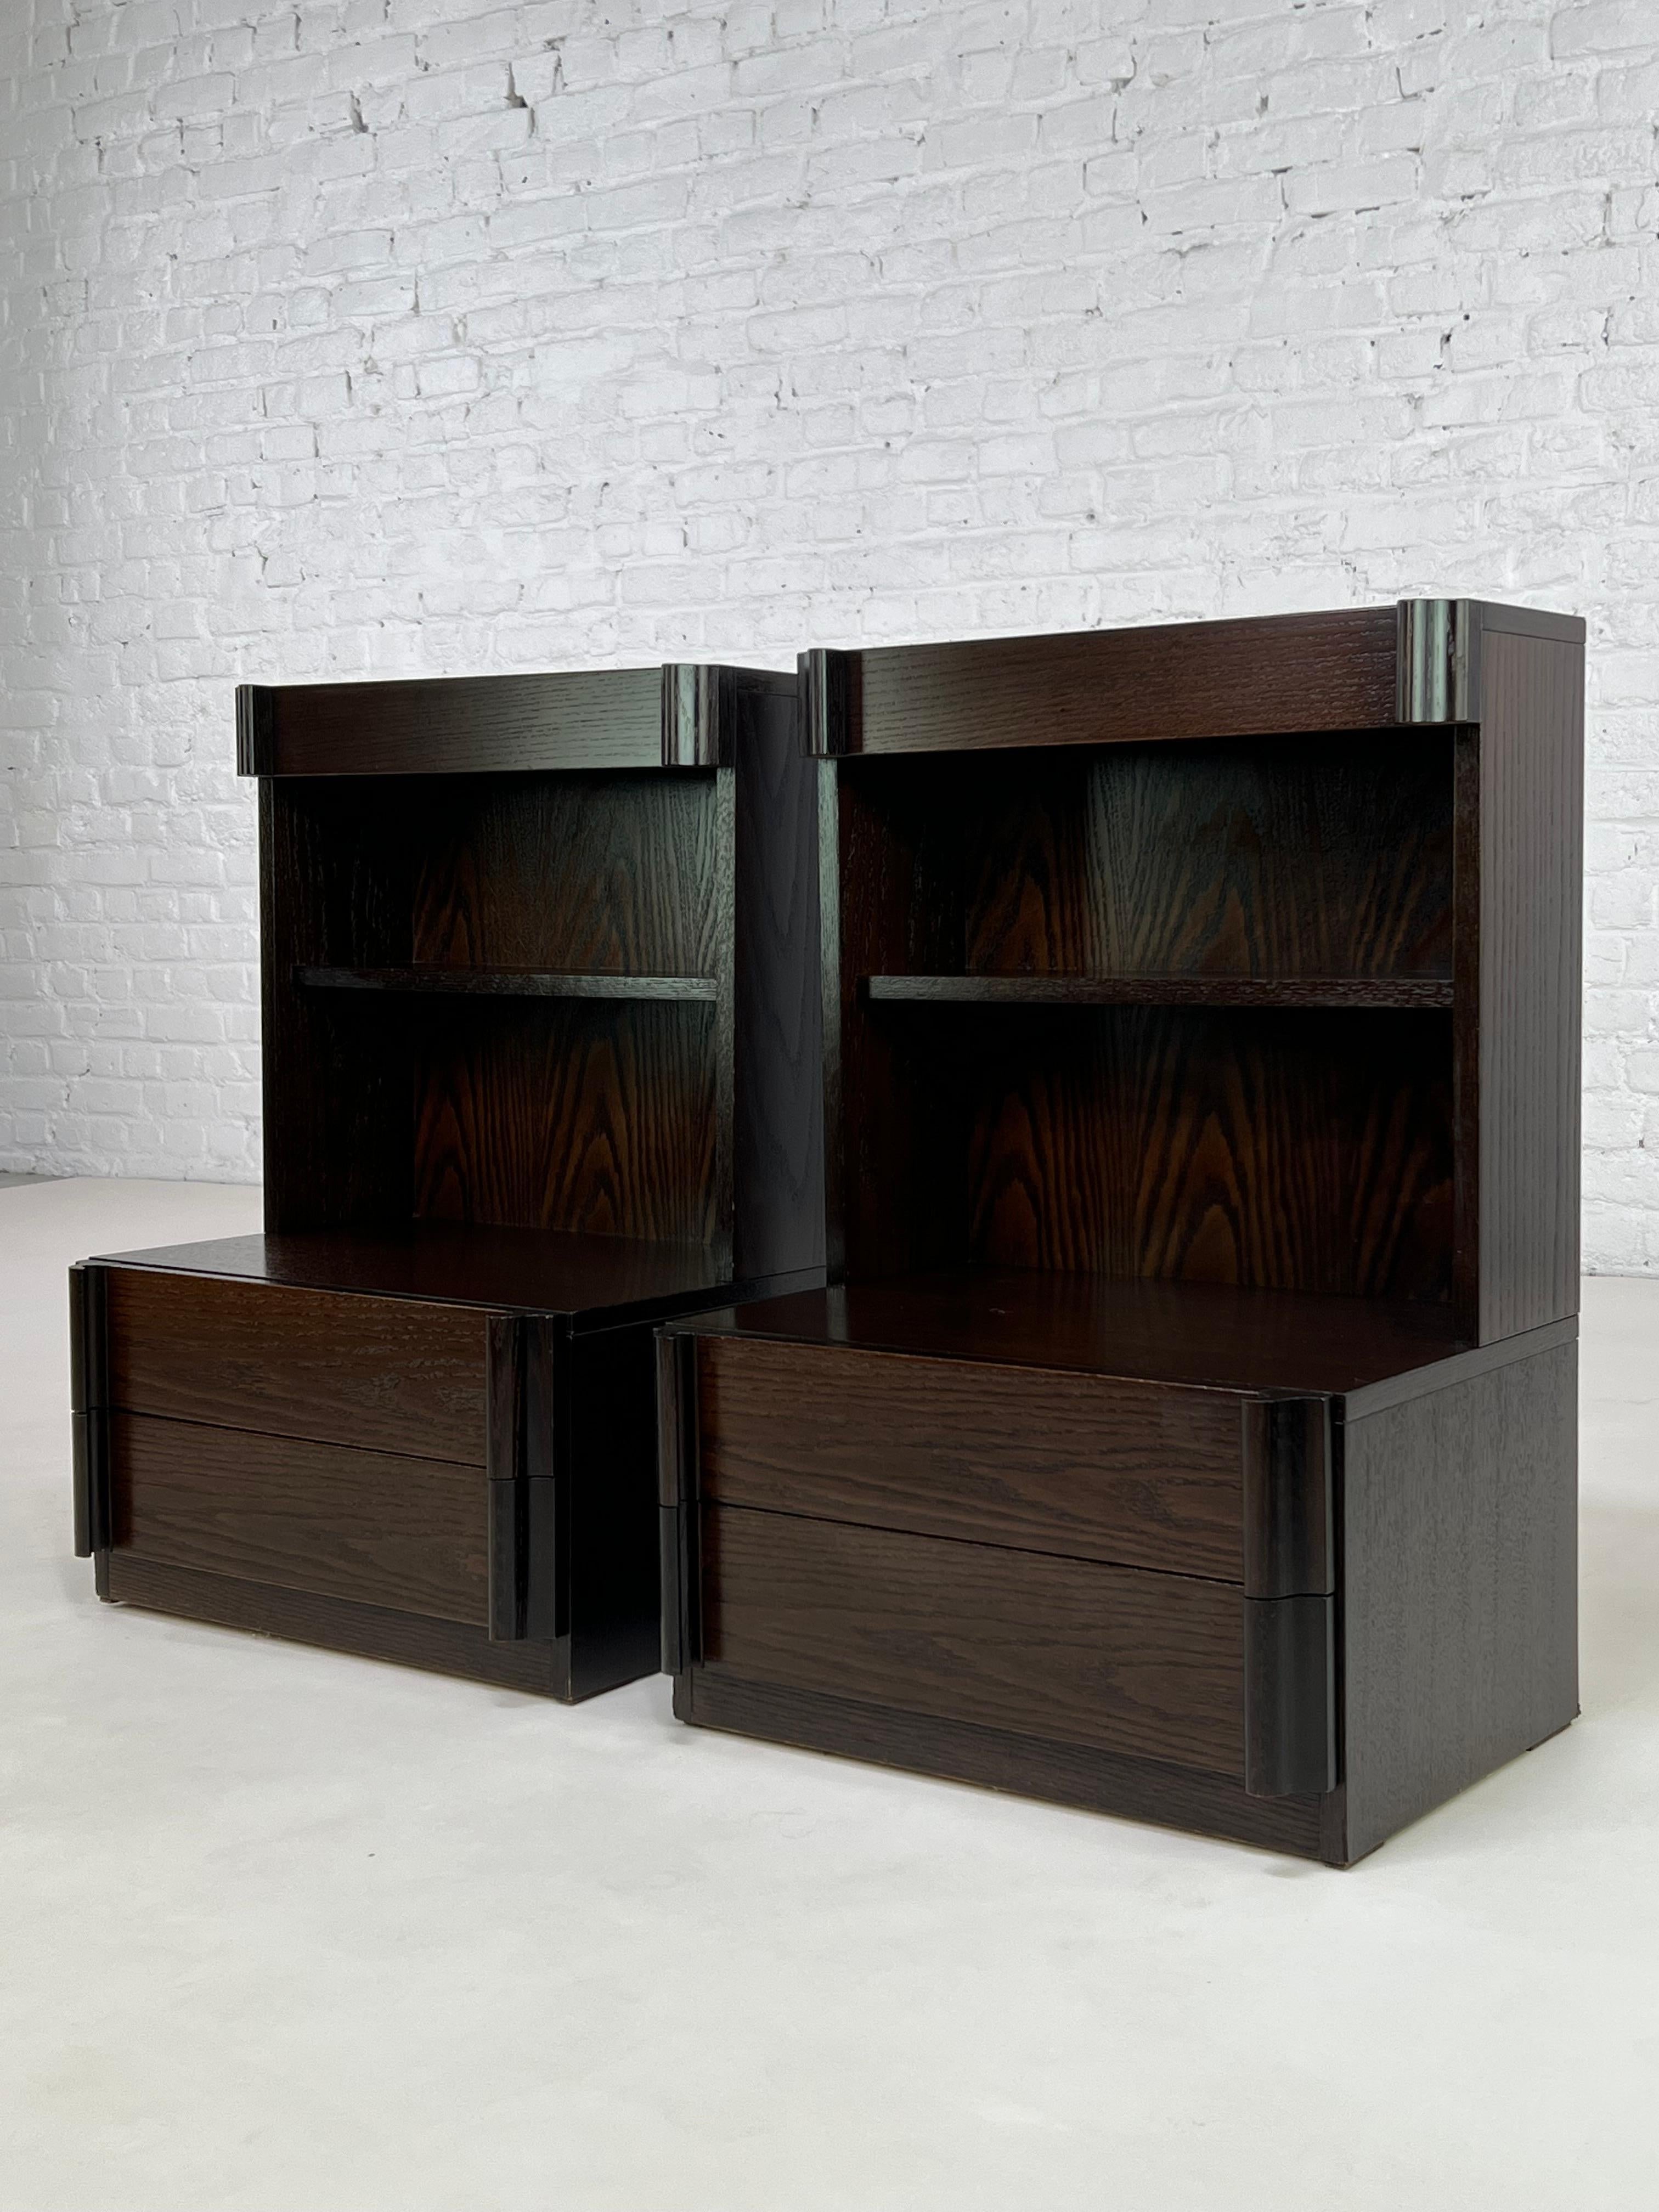 European Scandinavian Style and 1980s Design Pair of Large Wooden Bedside Tables